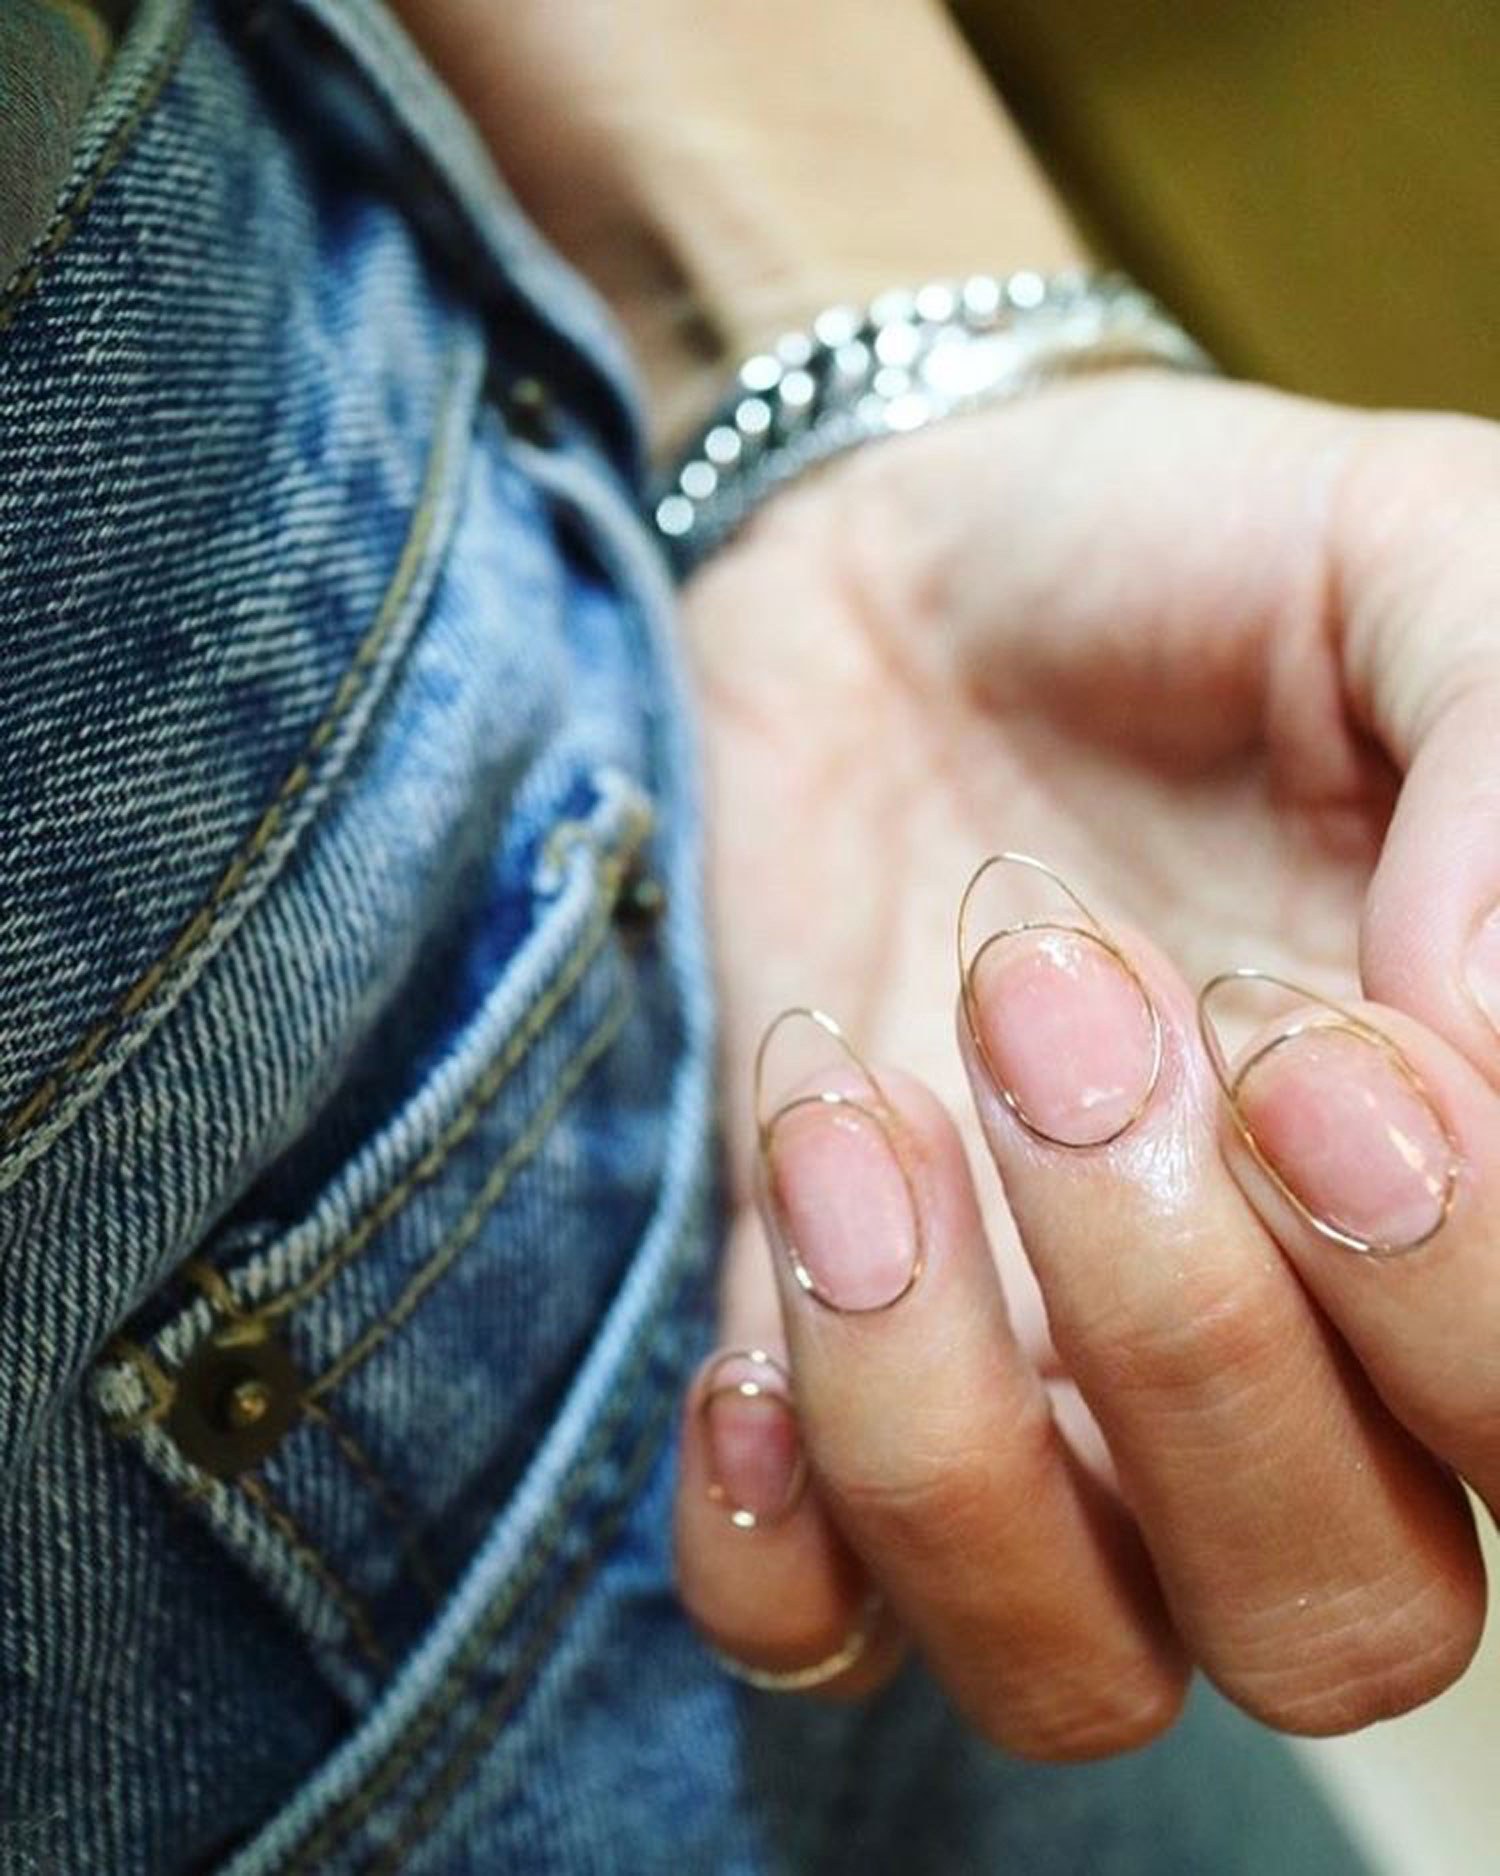 This Wire Manicure Is About As Easy As Nail Art Gets | Allure